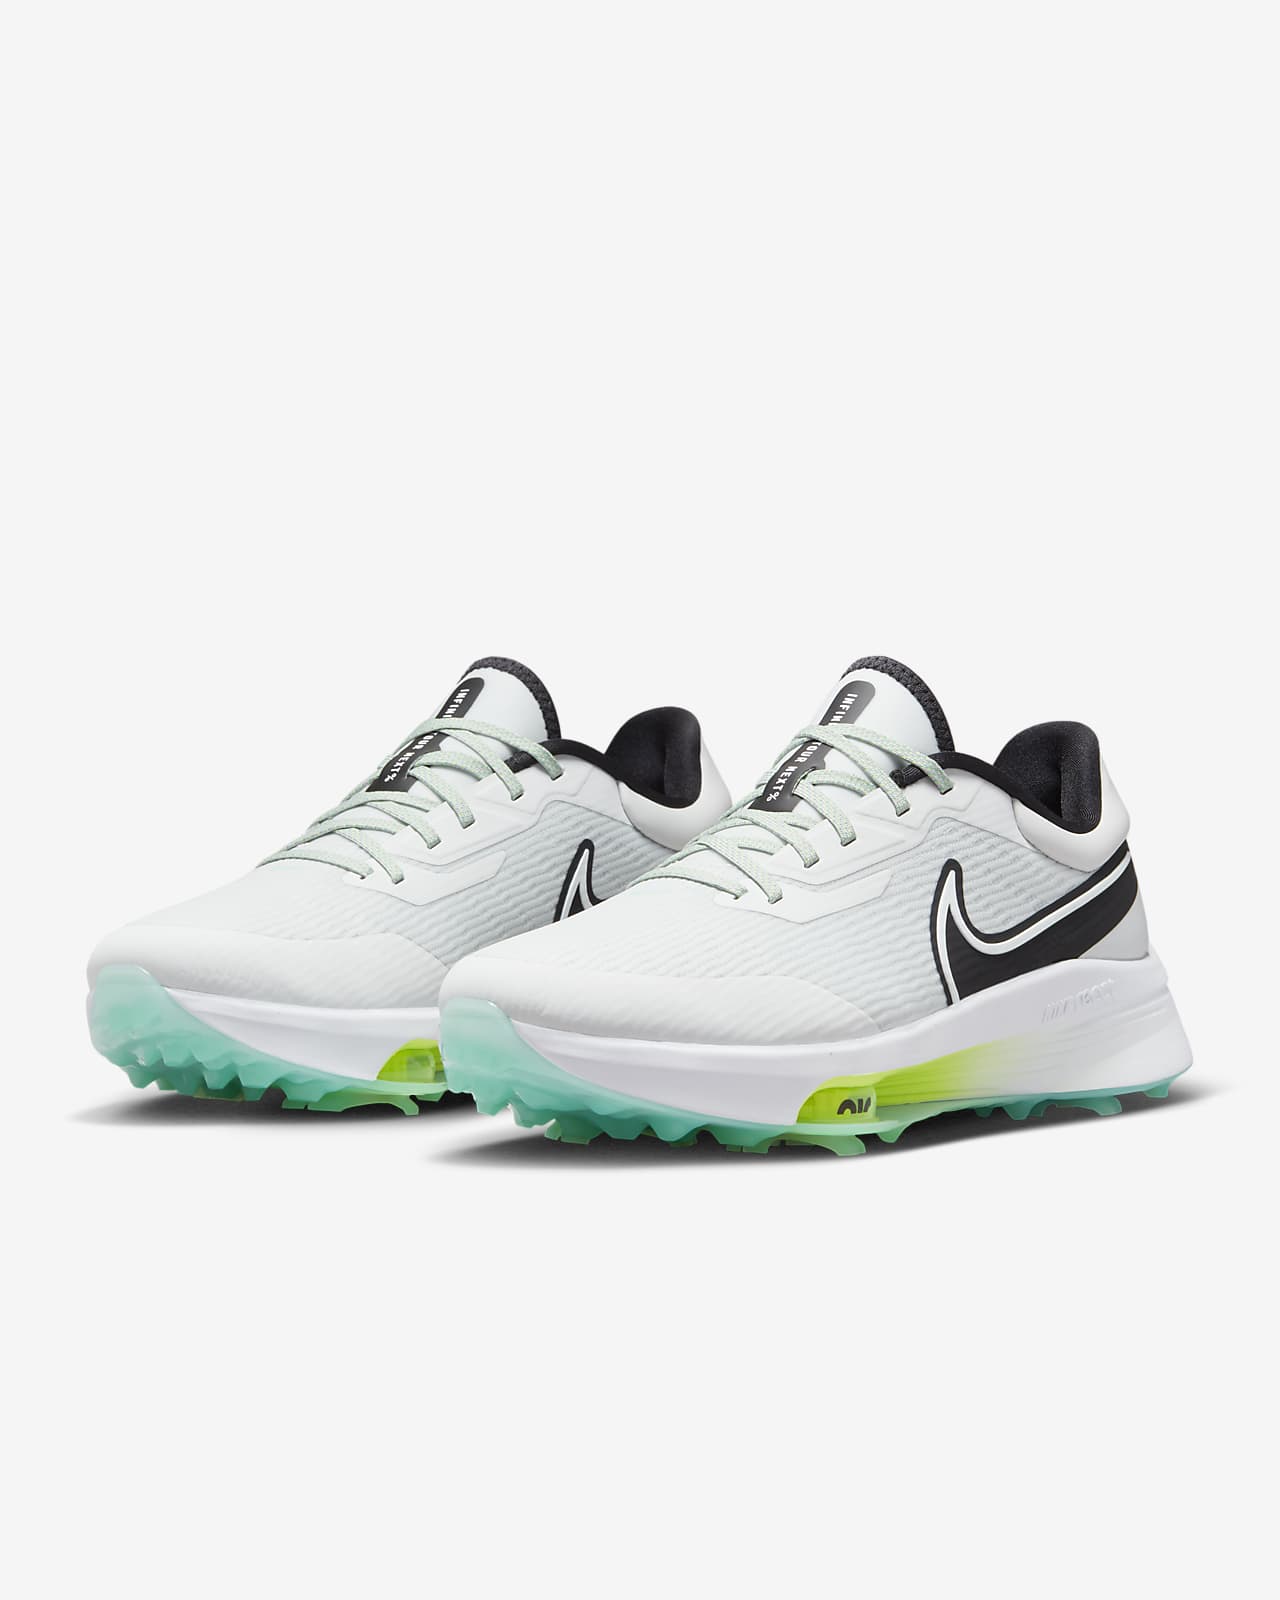 Nike Air Zoom Infinity Tour Men's Golf Shoes